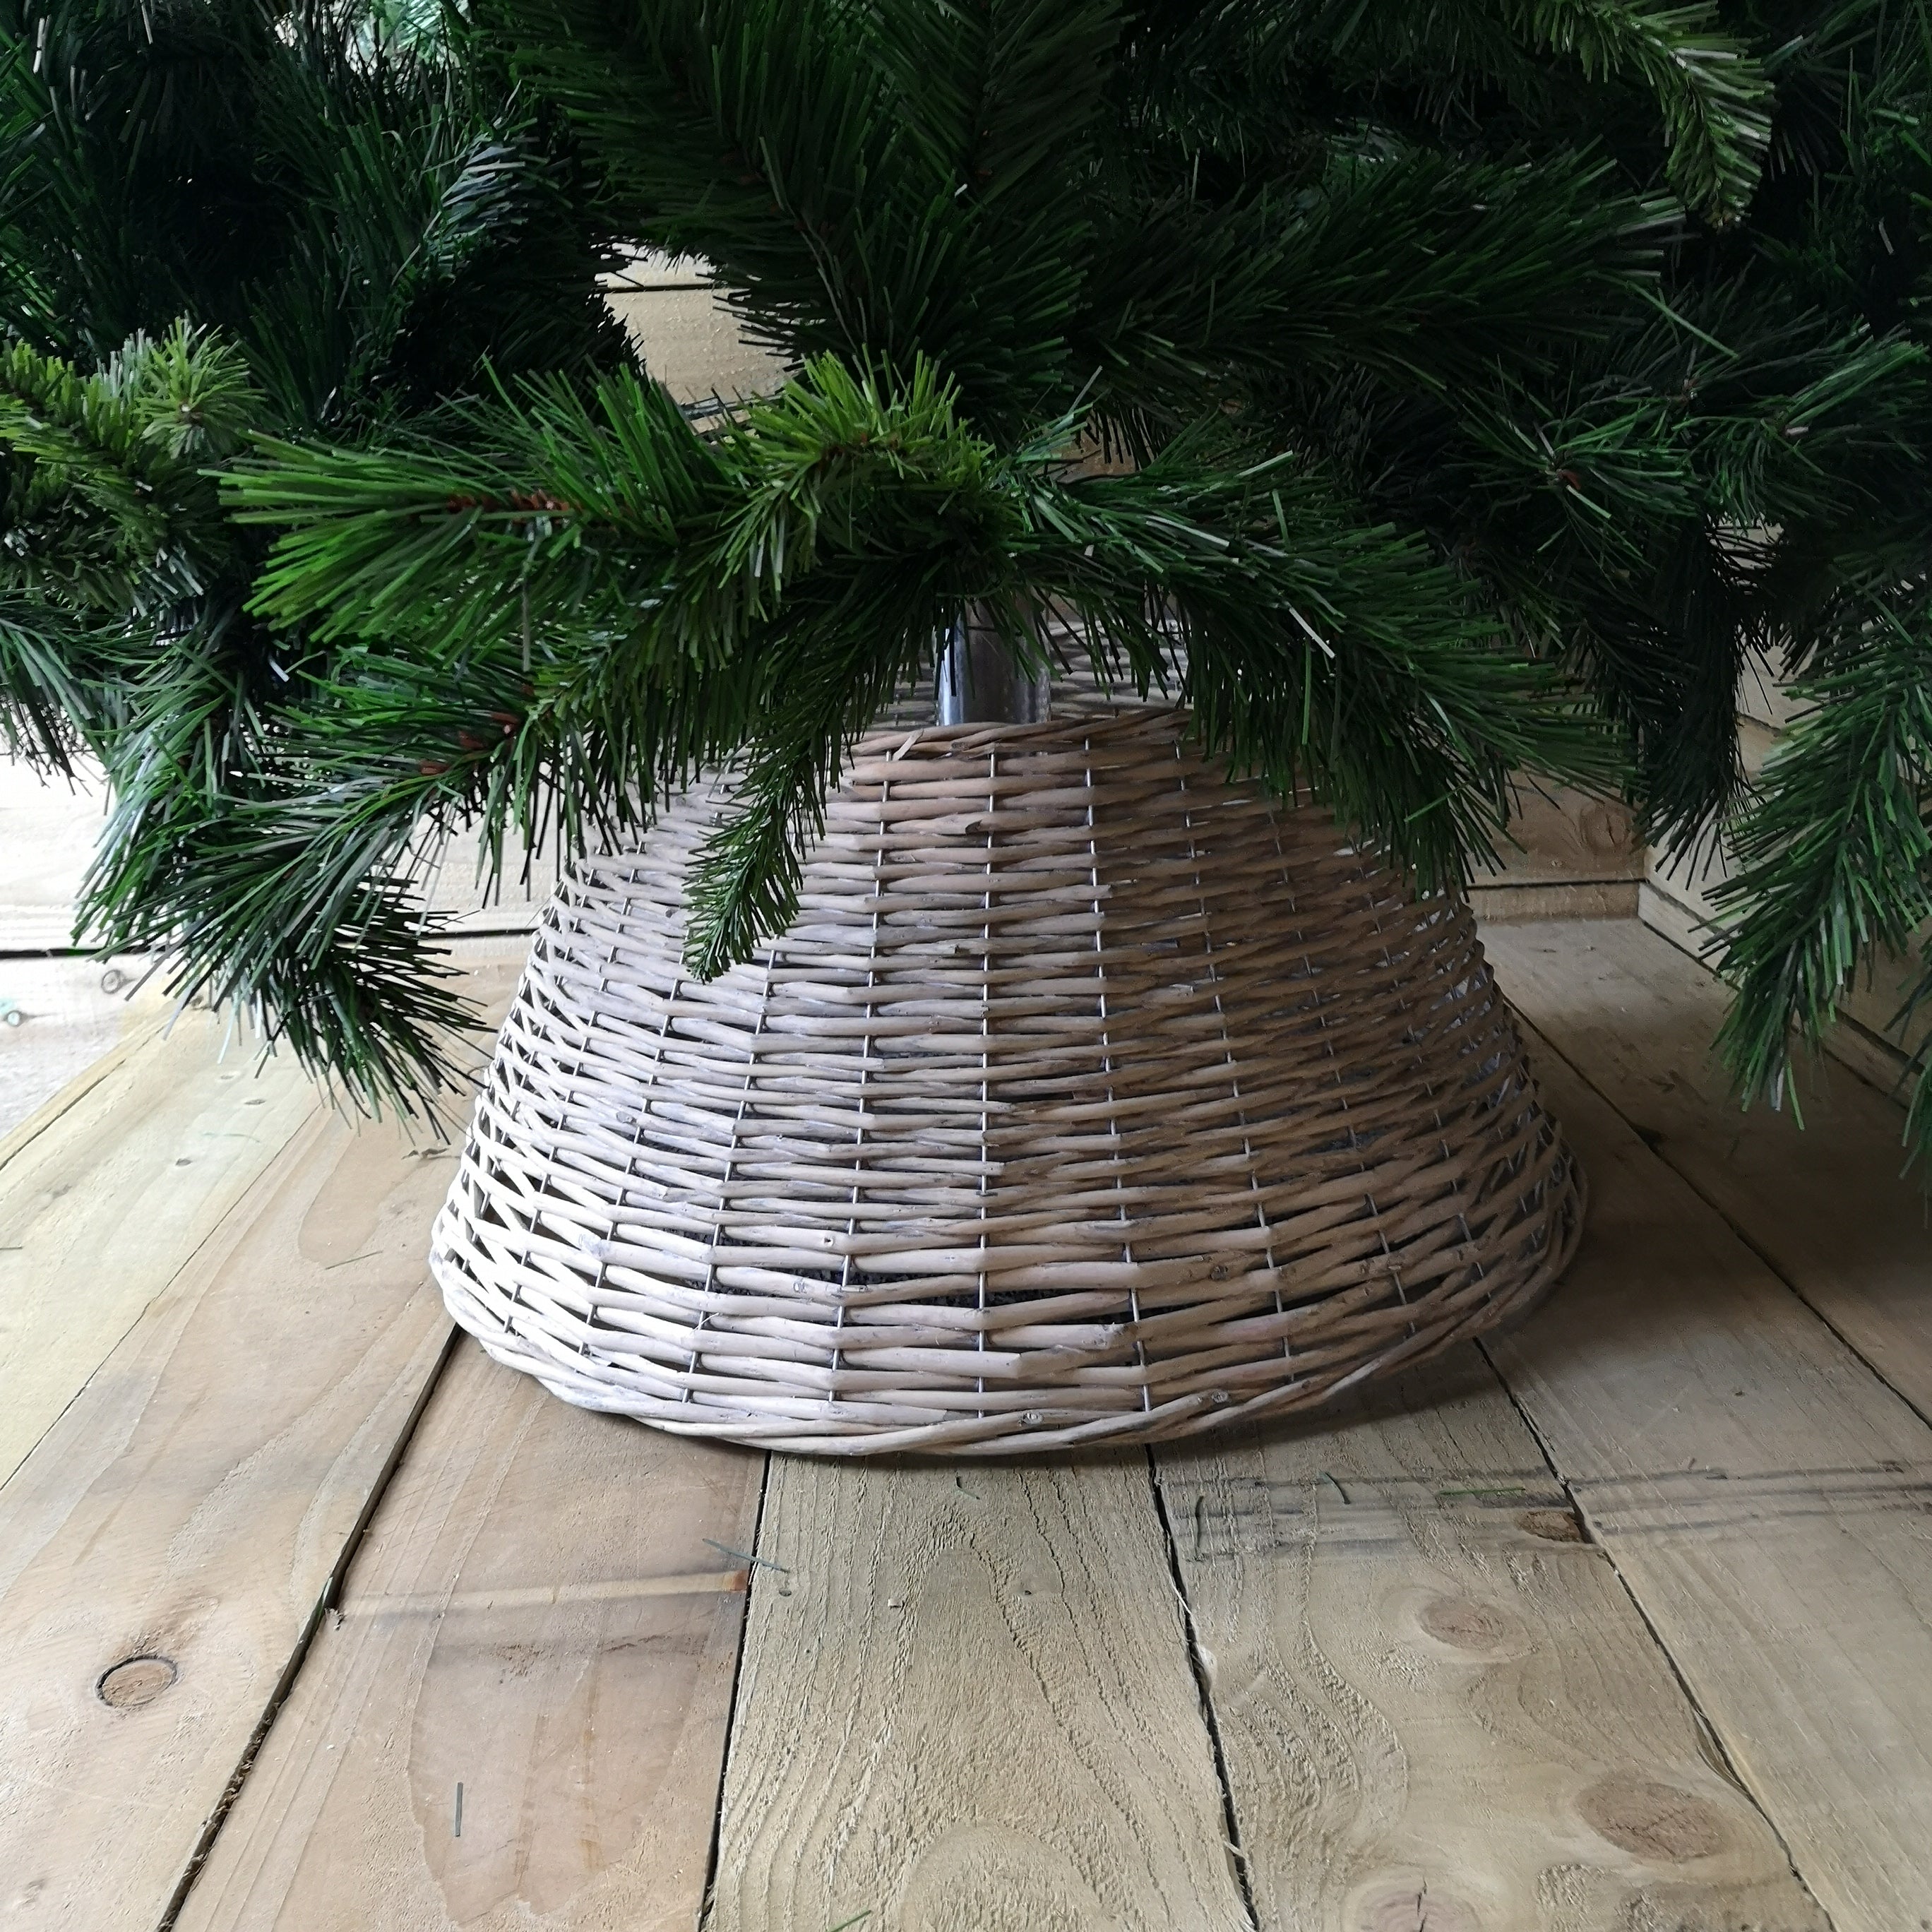 57CM X 28CM Wicker Willow Christmas Tree Skirt In a Natural Grey Colour